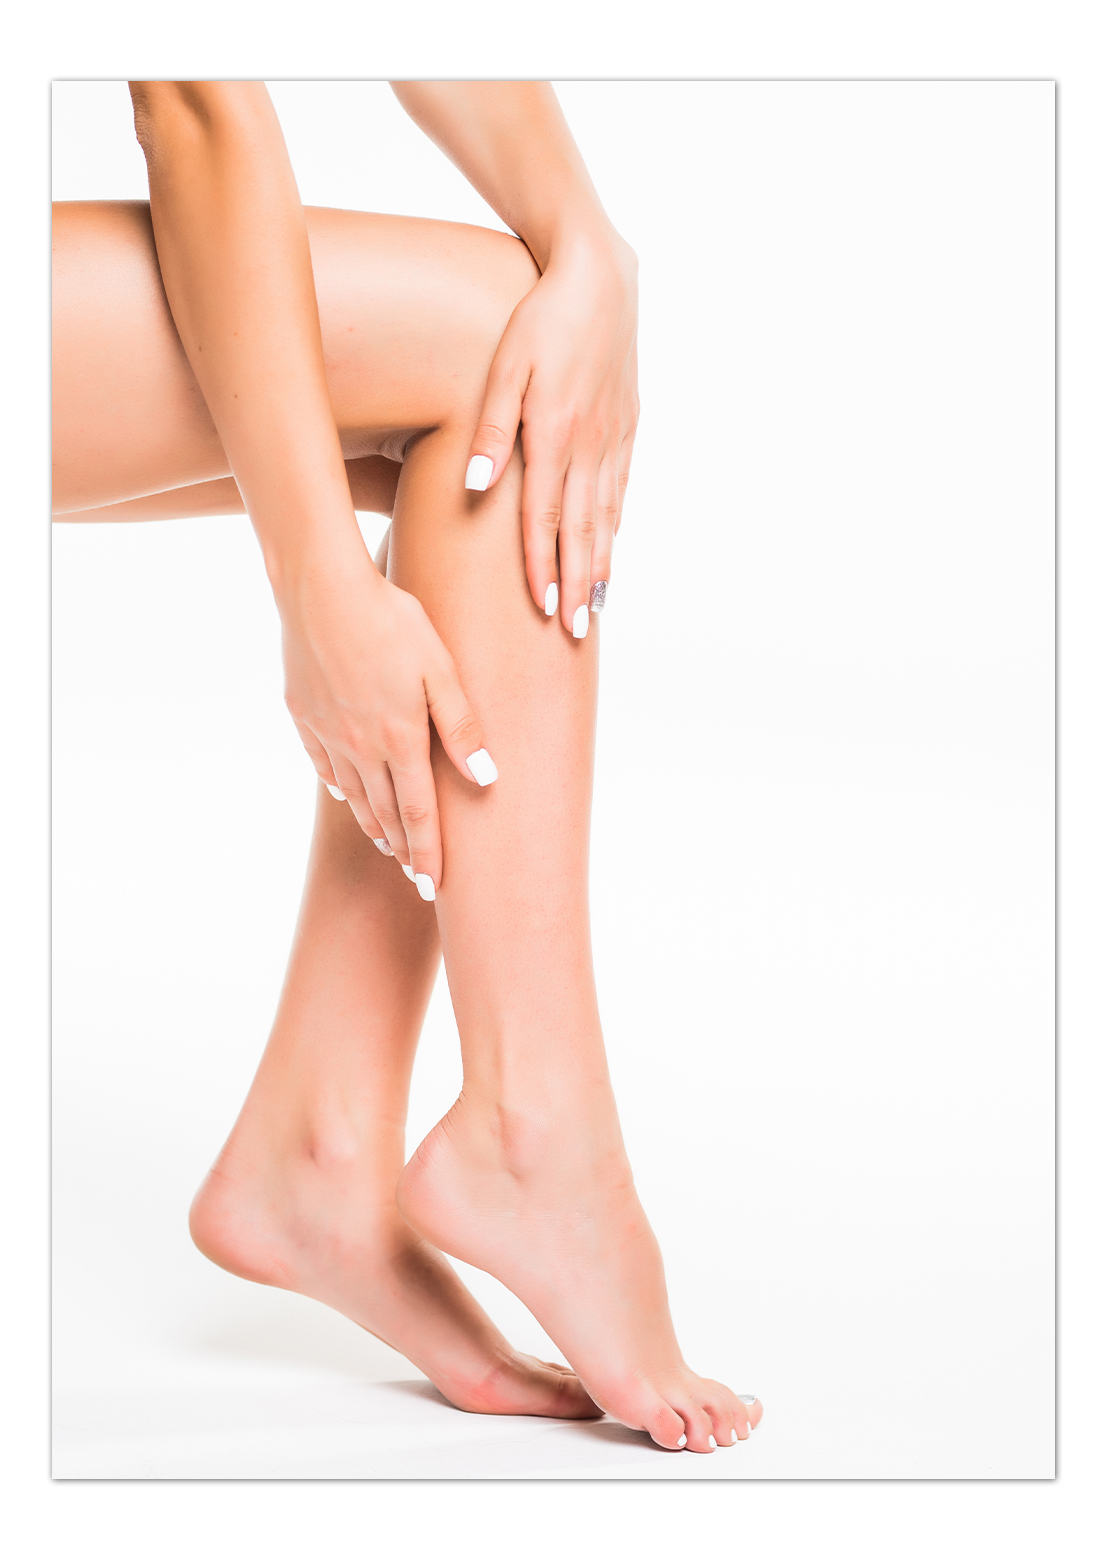 Hair Removal Guide For Smooth & Soft Legs